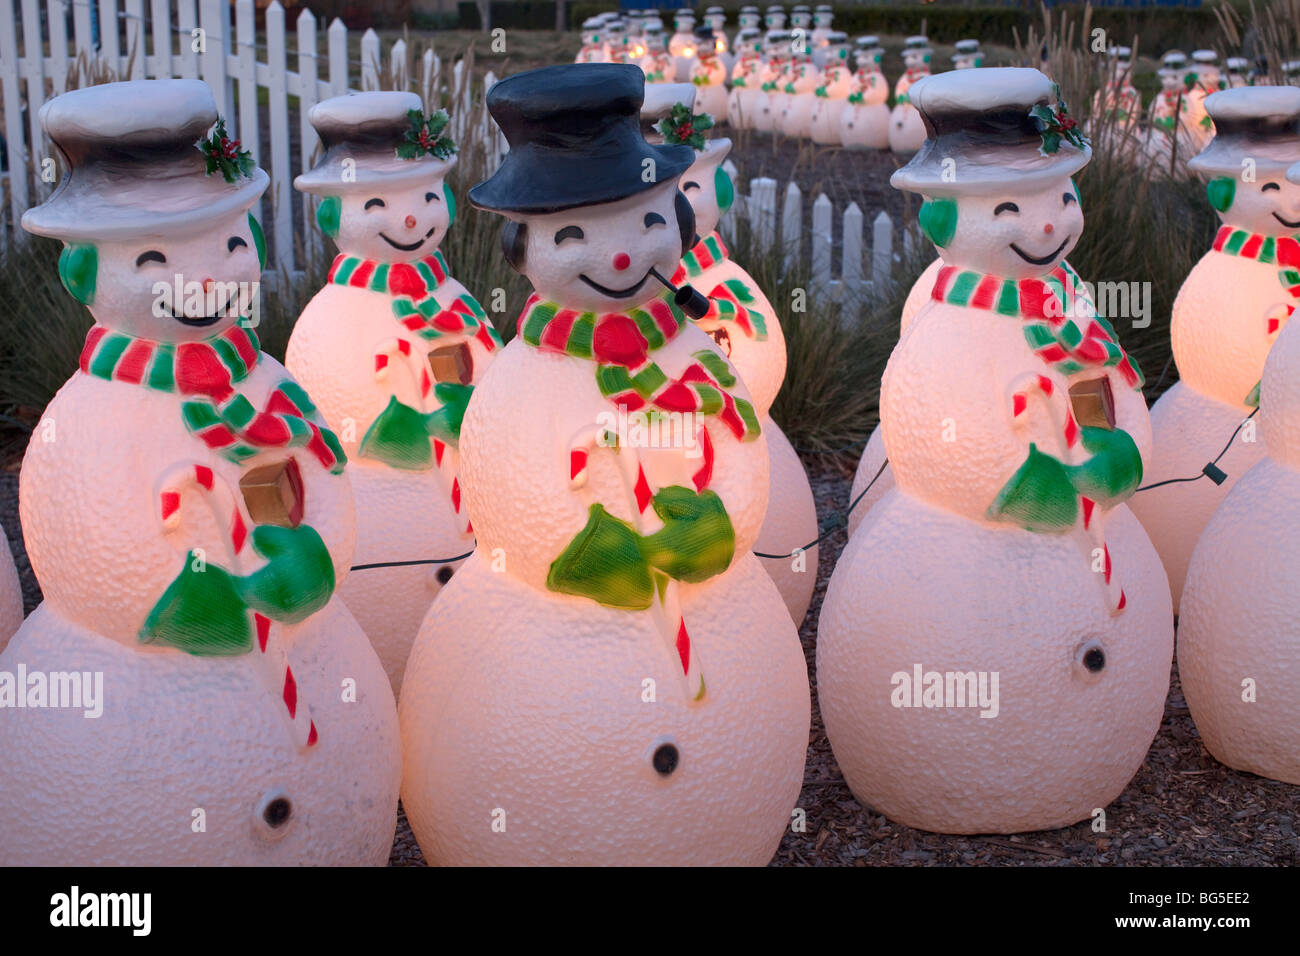 Lighted snowmen on parade with picket fence in background at Cornerstone  garden and sculpture center in Sonoma, California, USA Stock Photo - Alamy